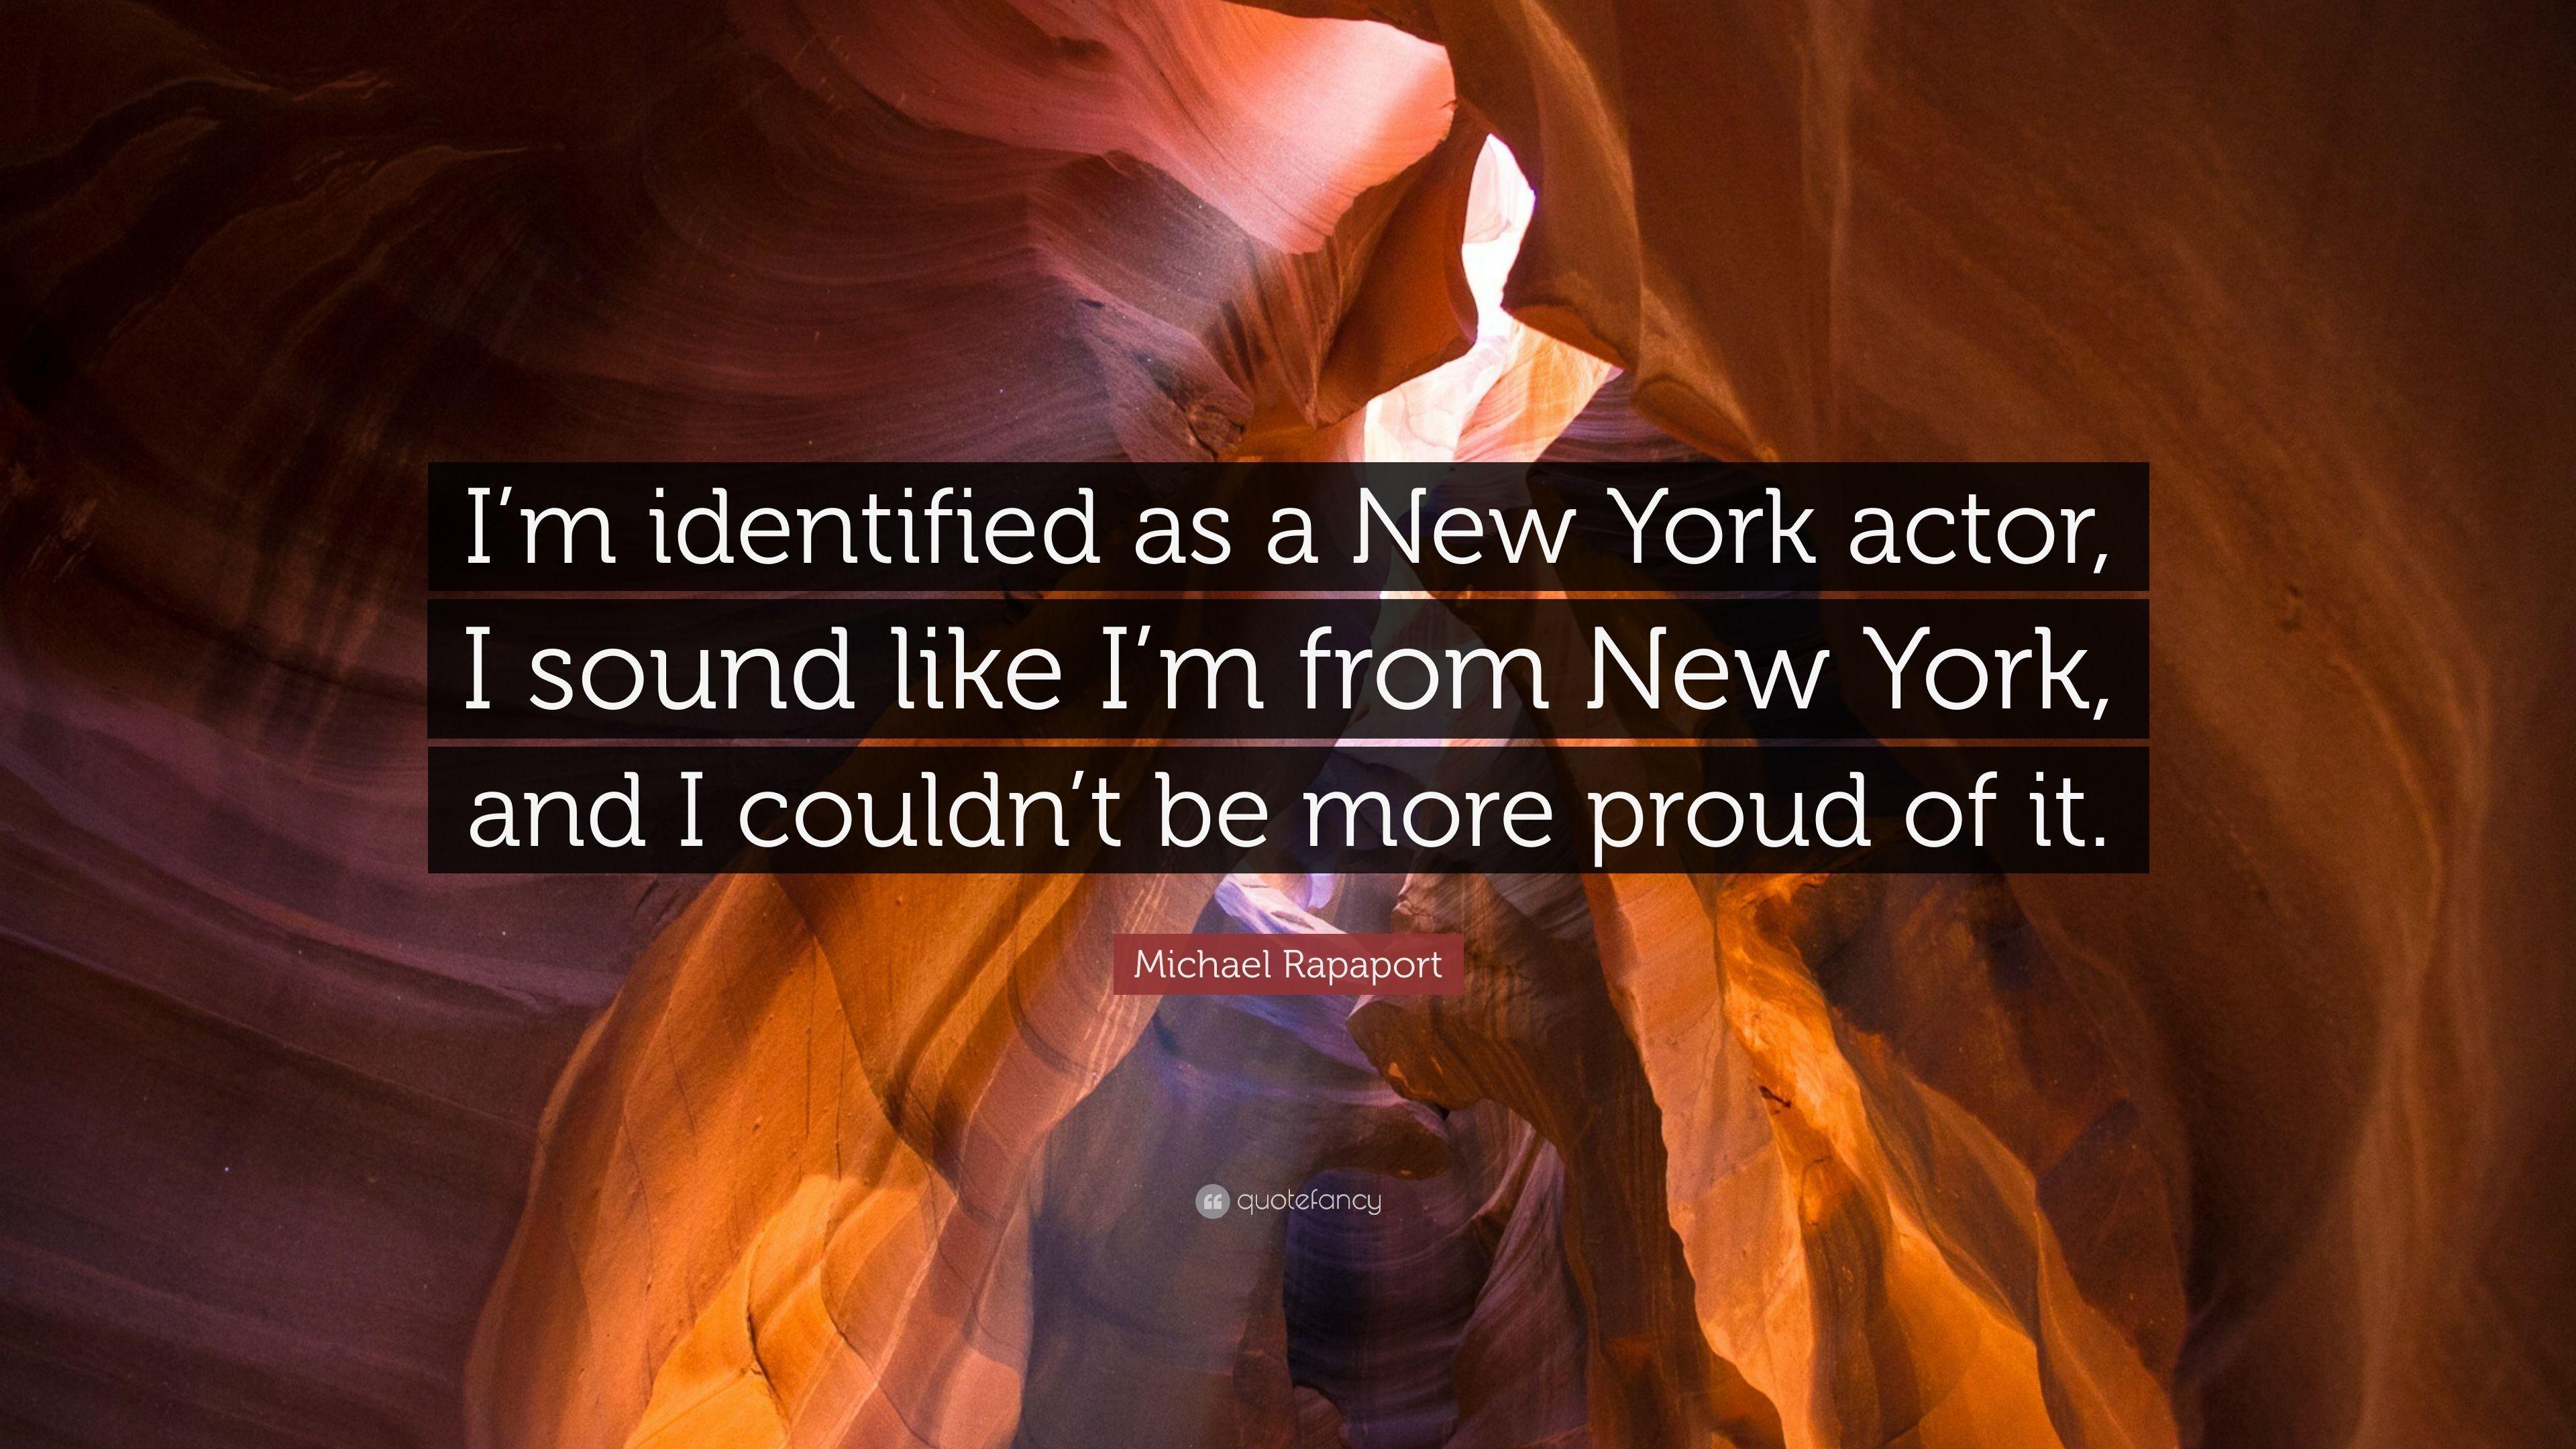 Michael Rapaport Quote: “I'm identified as a New York actor, I